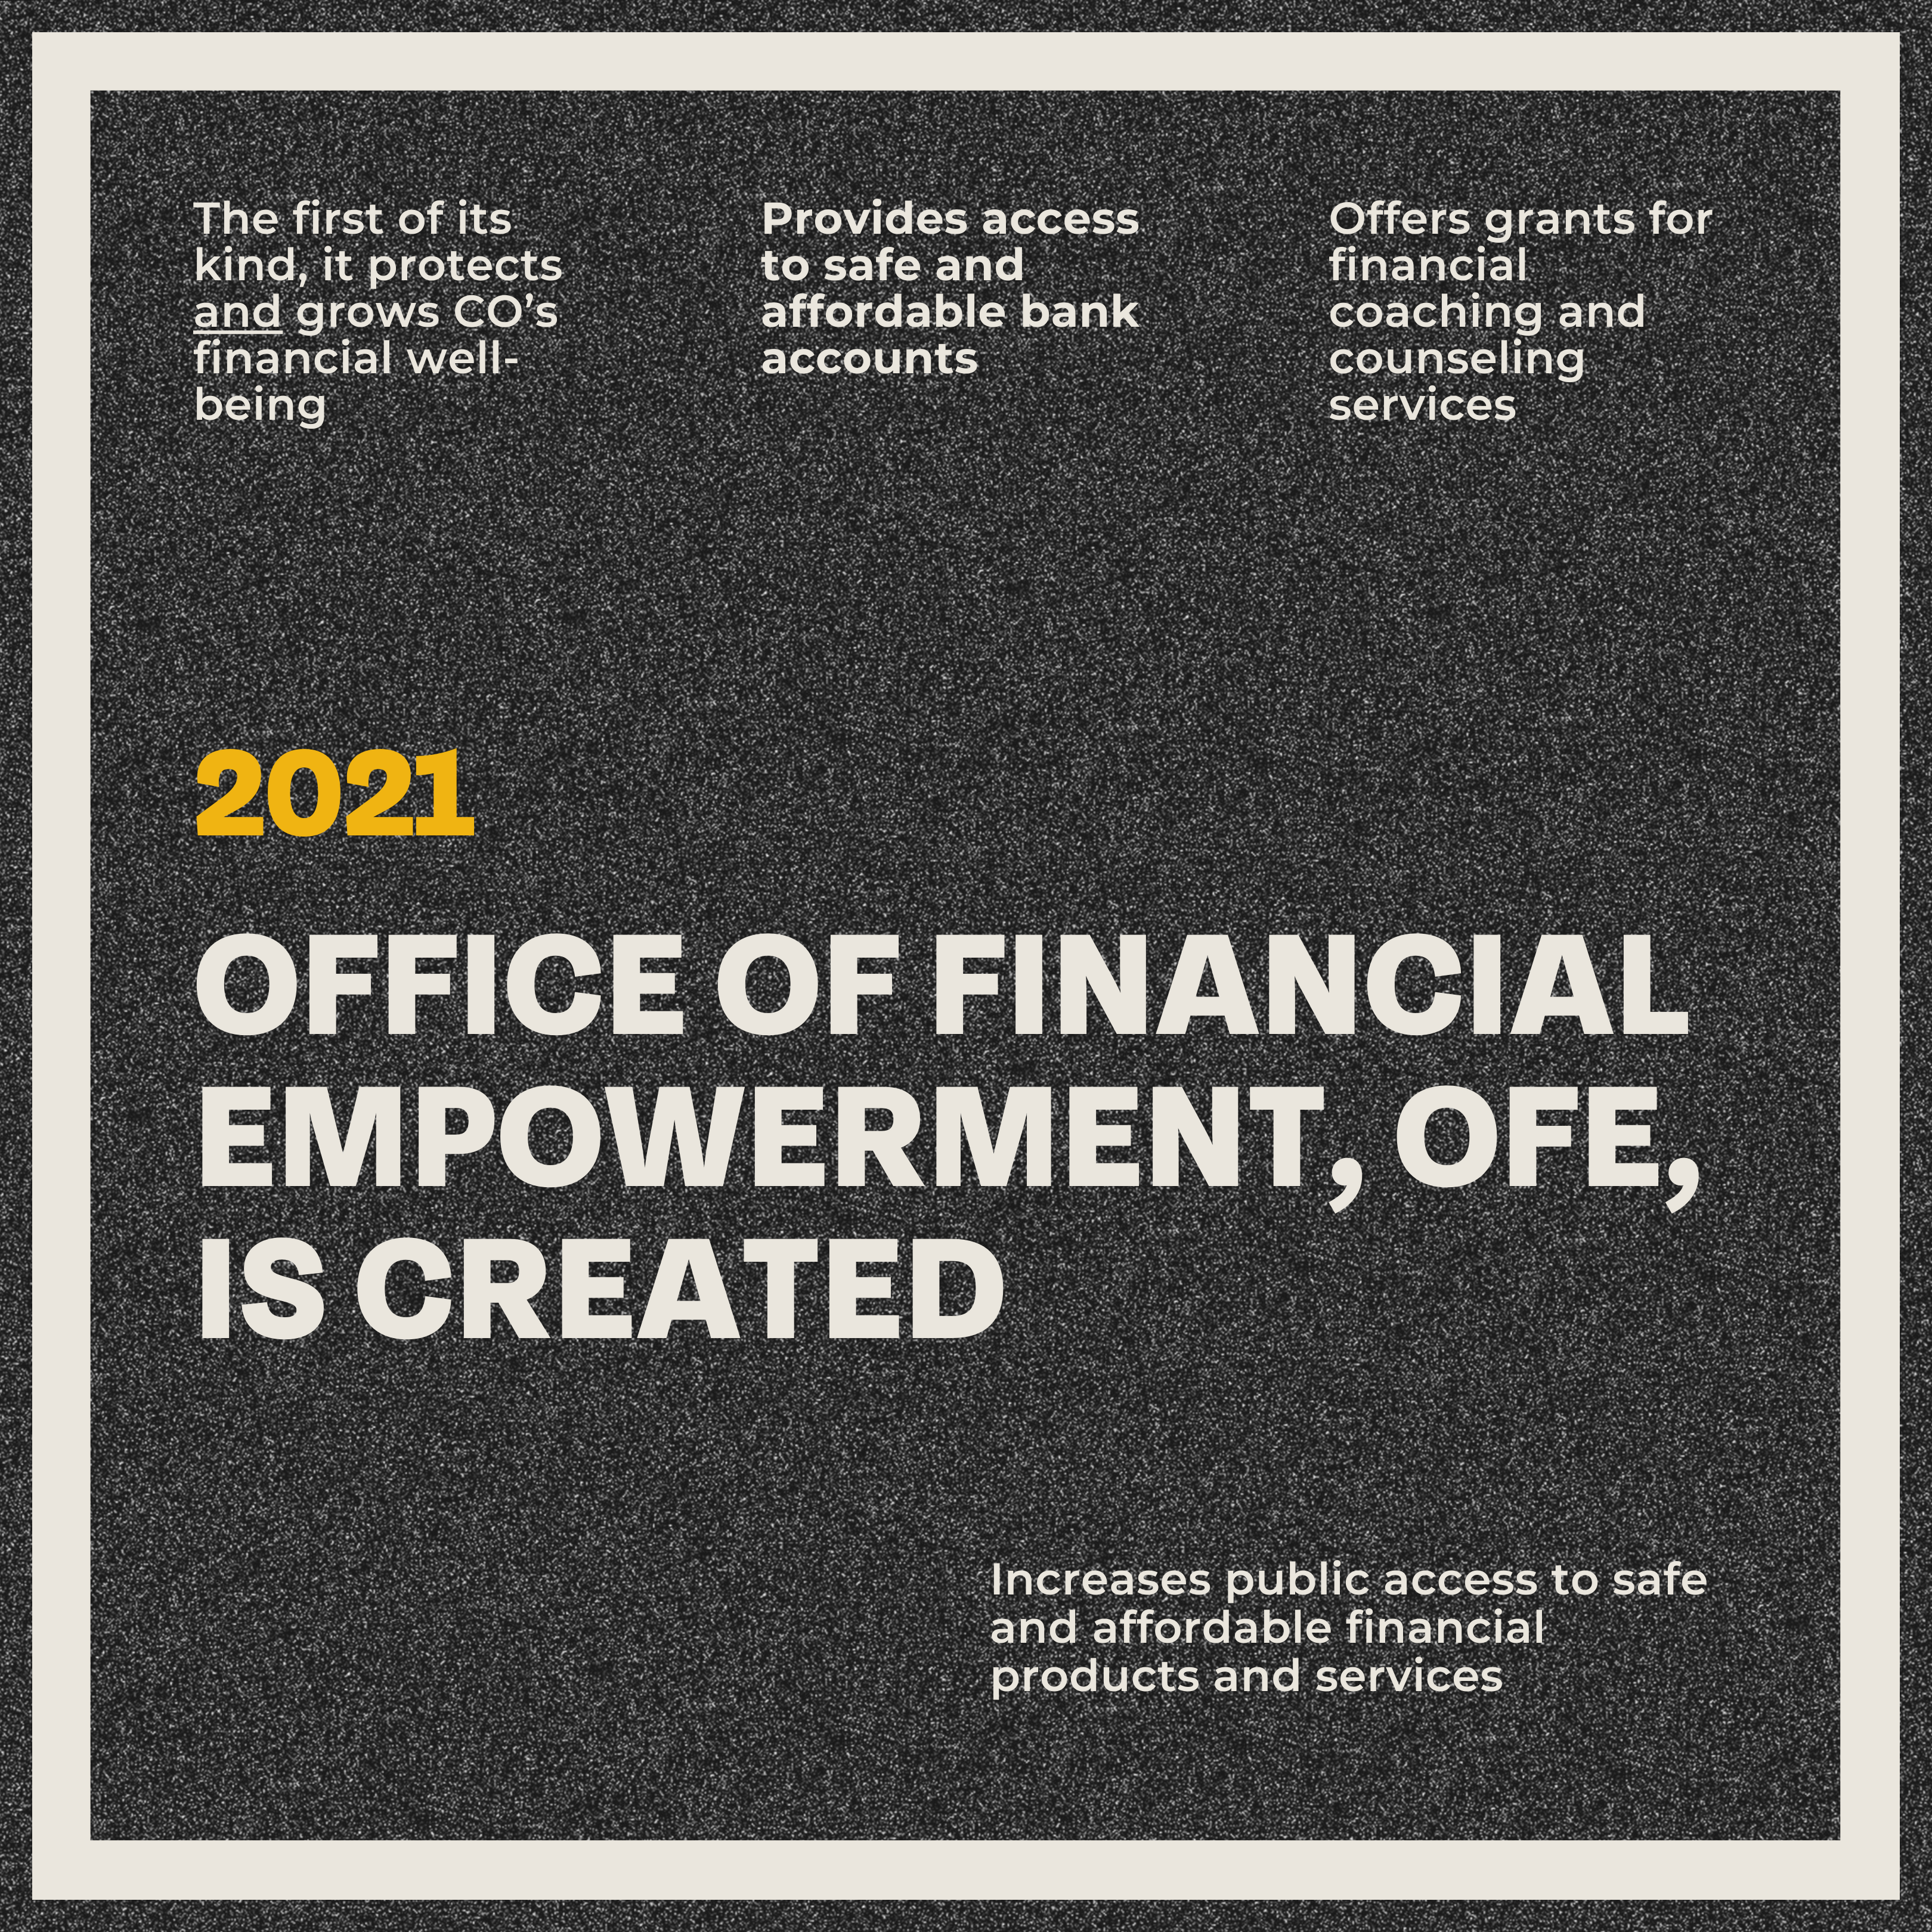 2021: establishment of the office of financial empowerment highlighted by its key initiatives in consumer protection, financial education, and access to services.